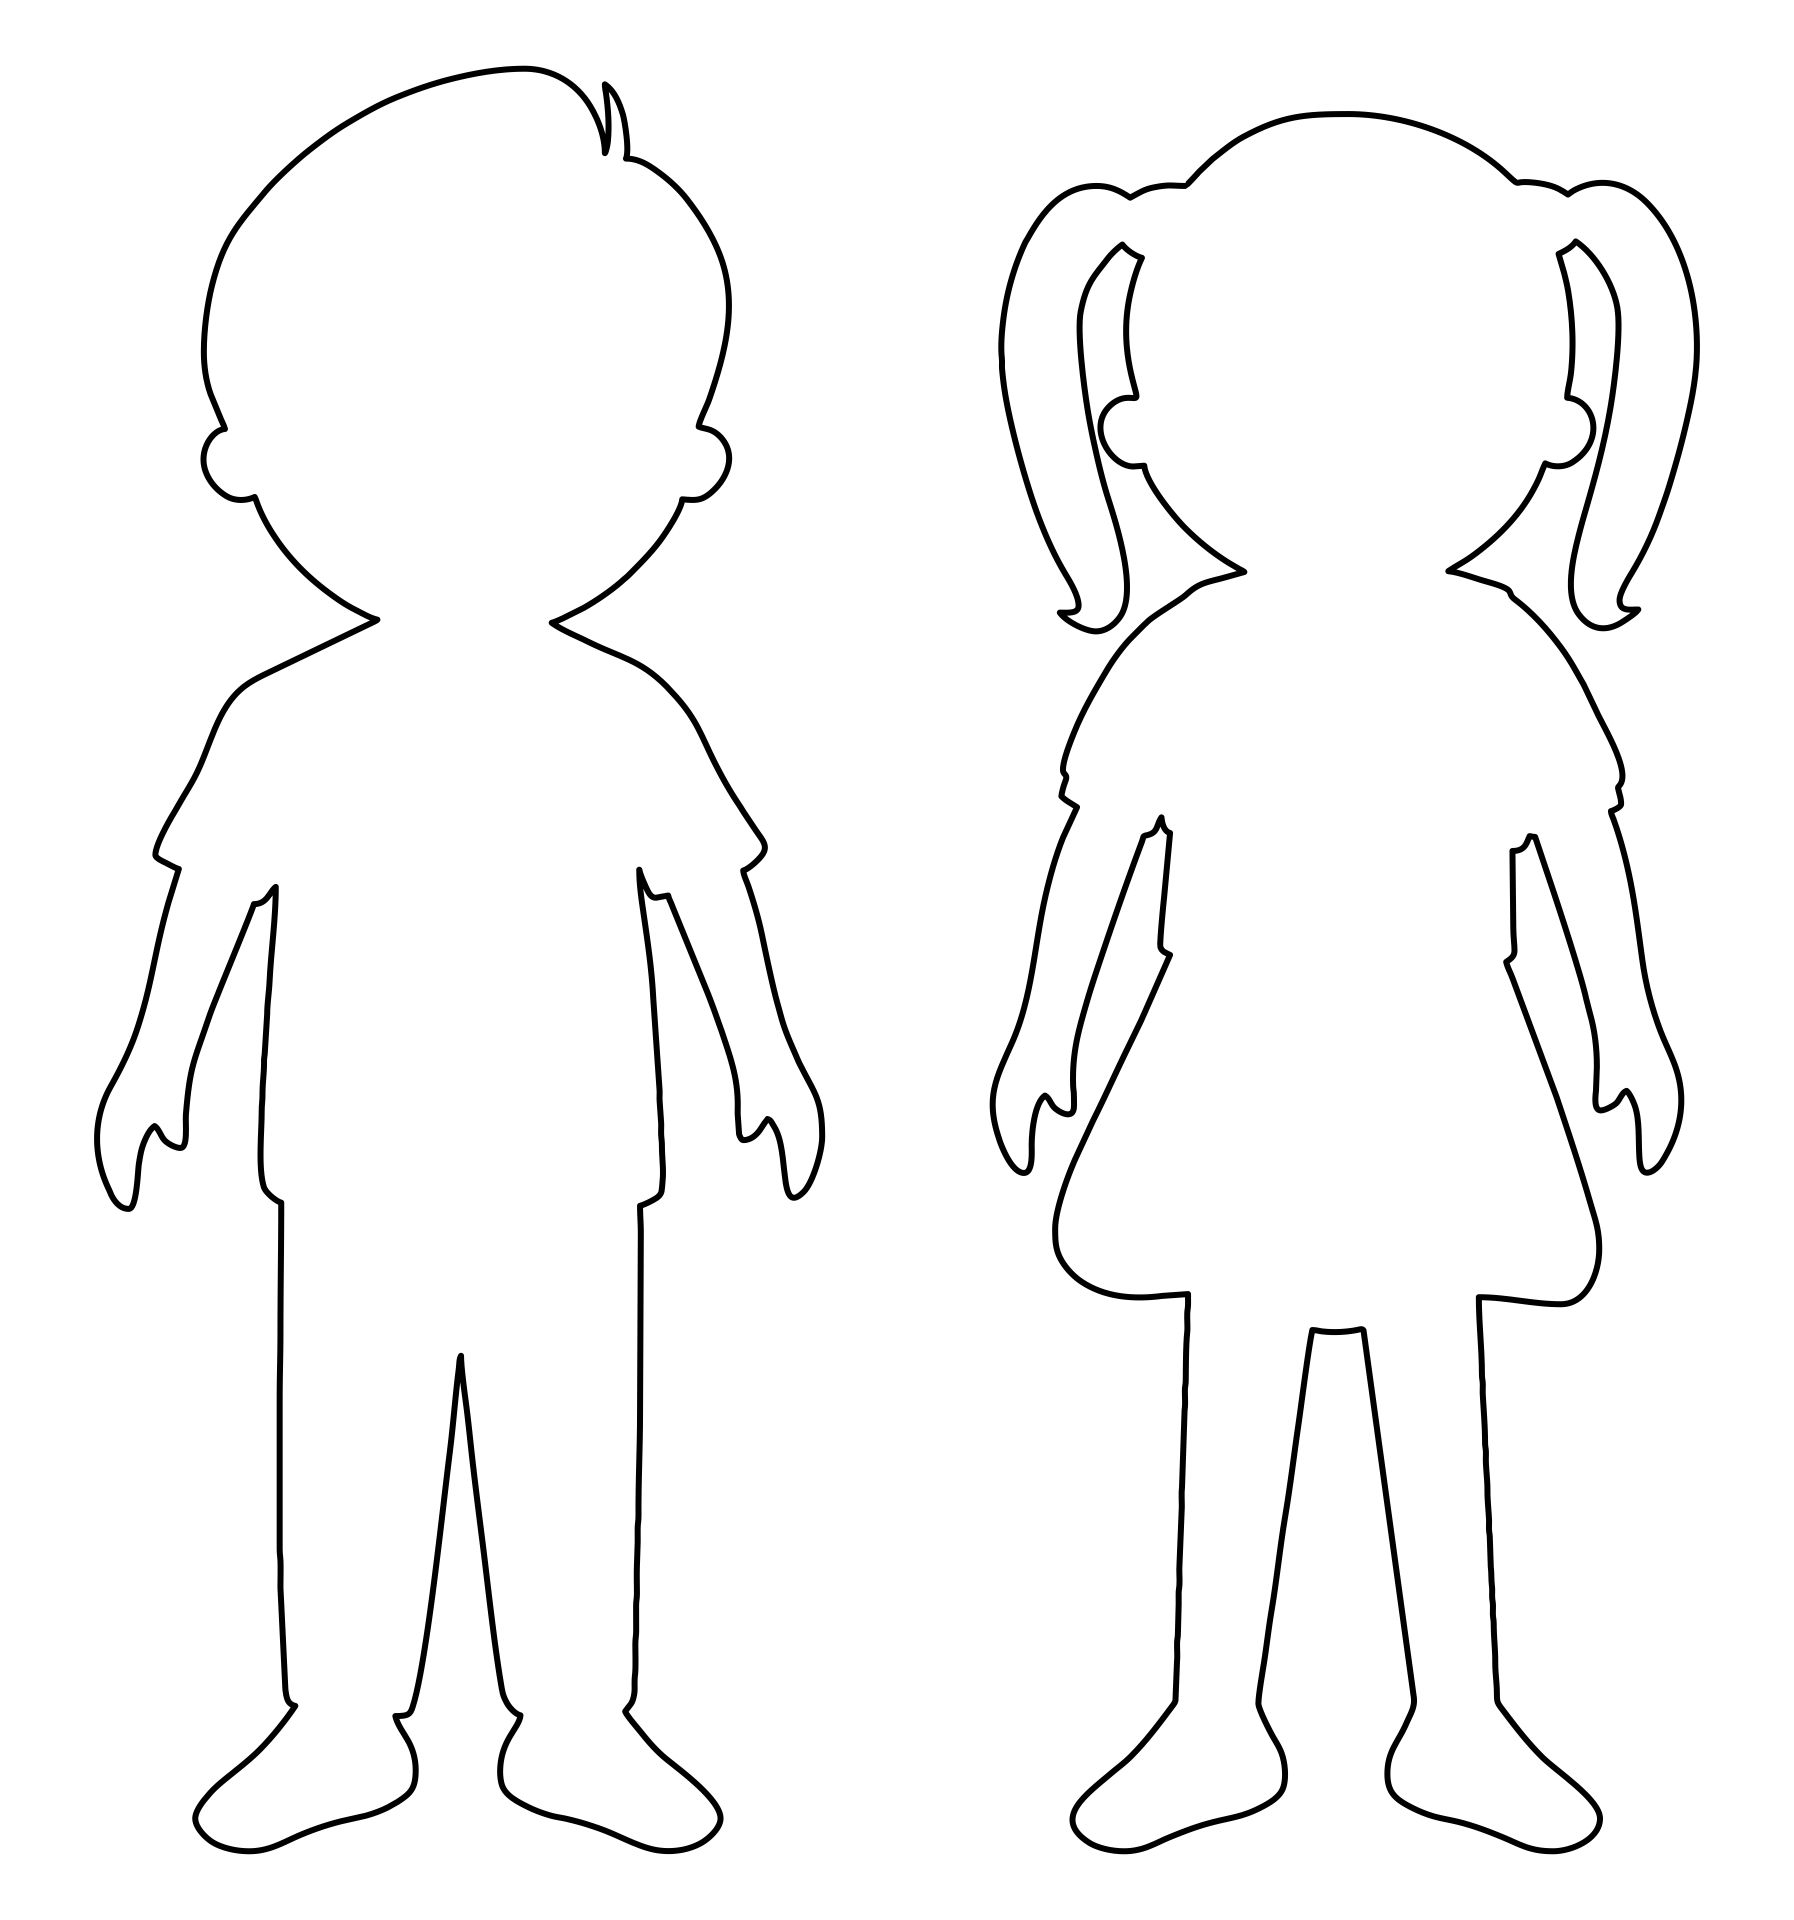 printable-person-cut-out